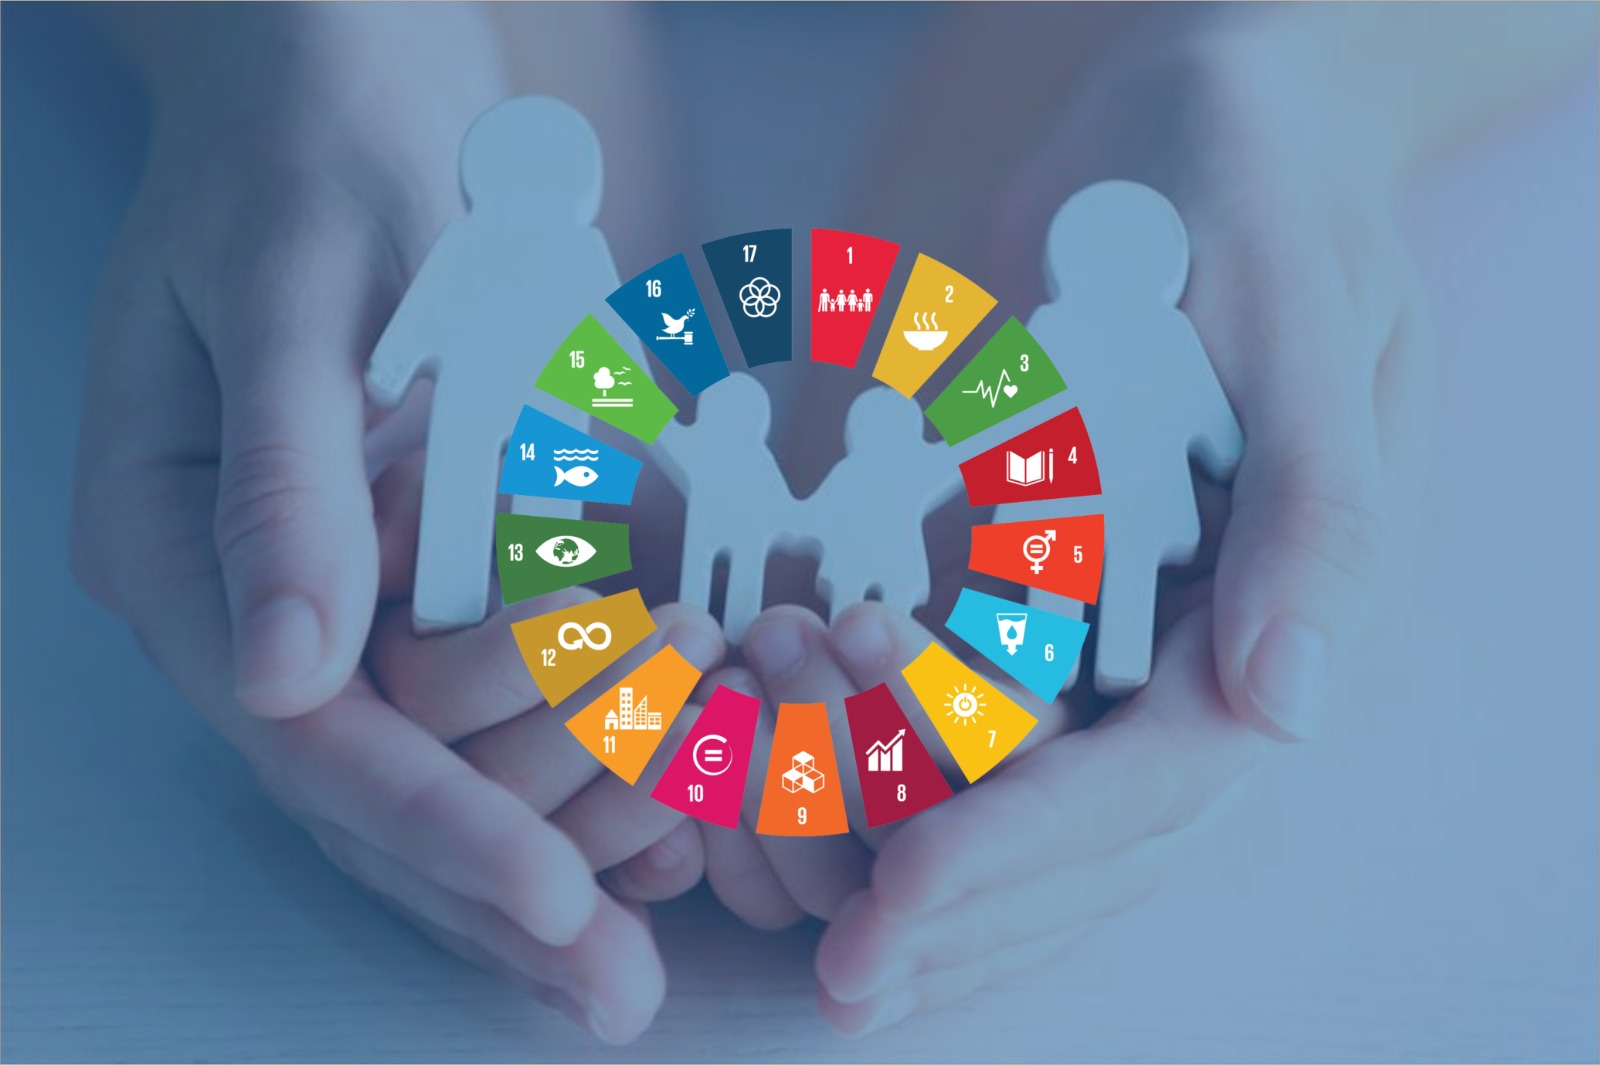 Linking the new social code and SDGs